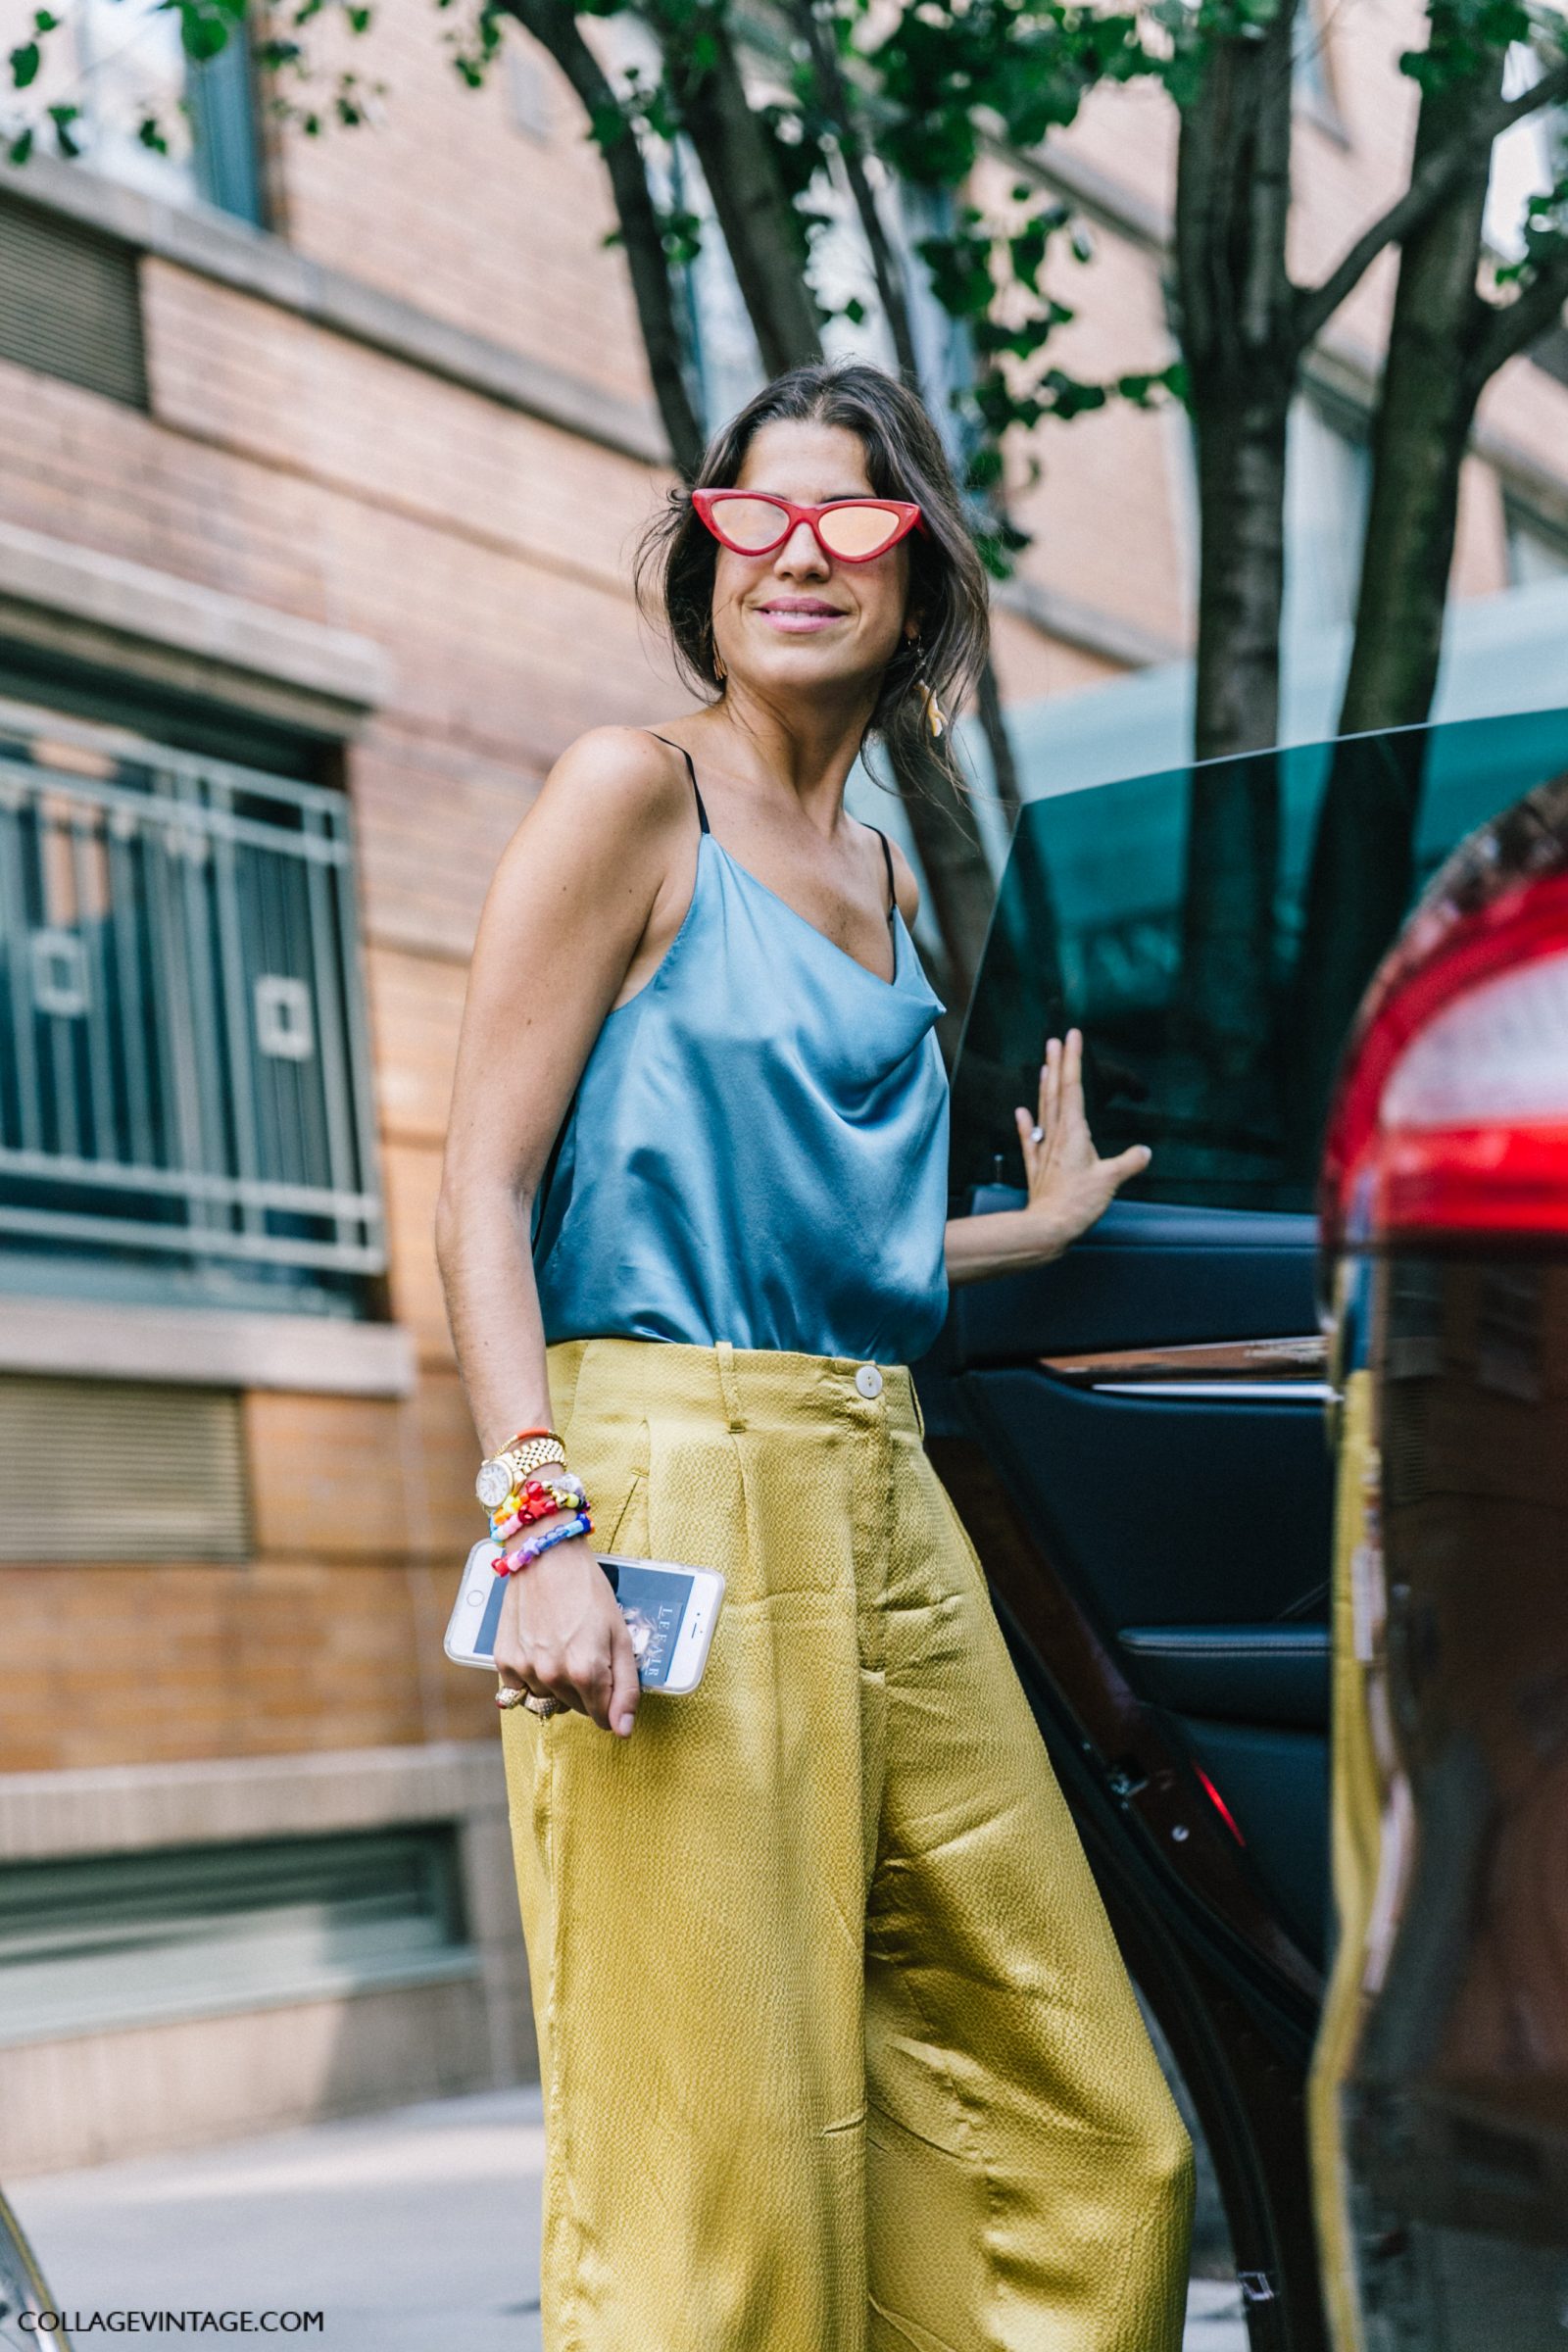 nyfw-new_york_fashion_week_ss17-street_style-outfits-collage_vintage-26